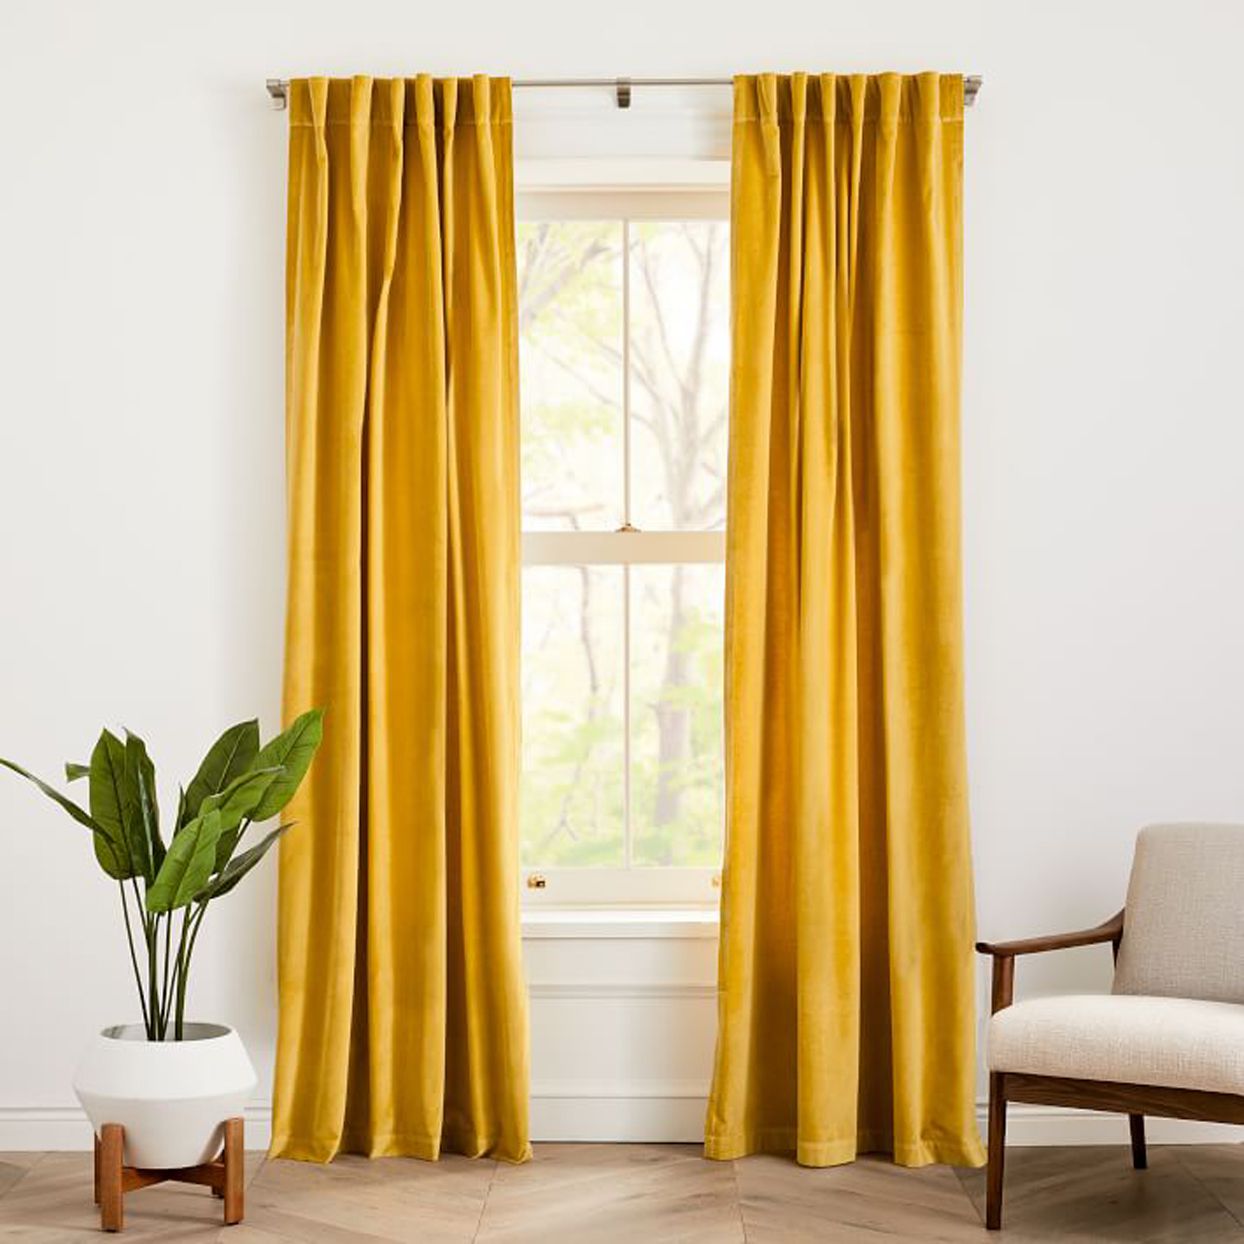 The Best Living Room Curtain Ideas, How To Choose Curtains For Living Room India